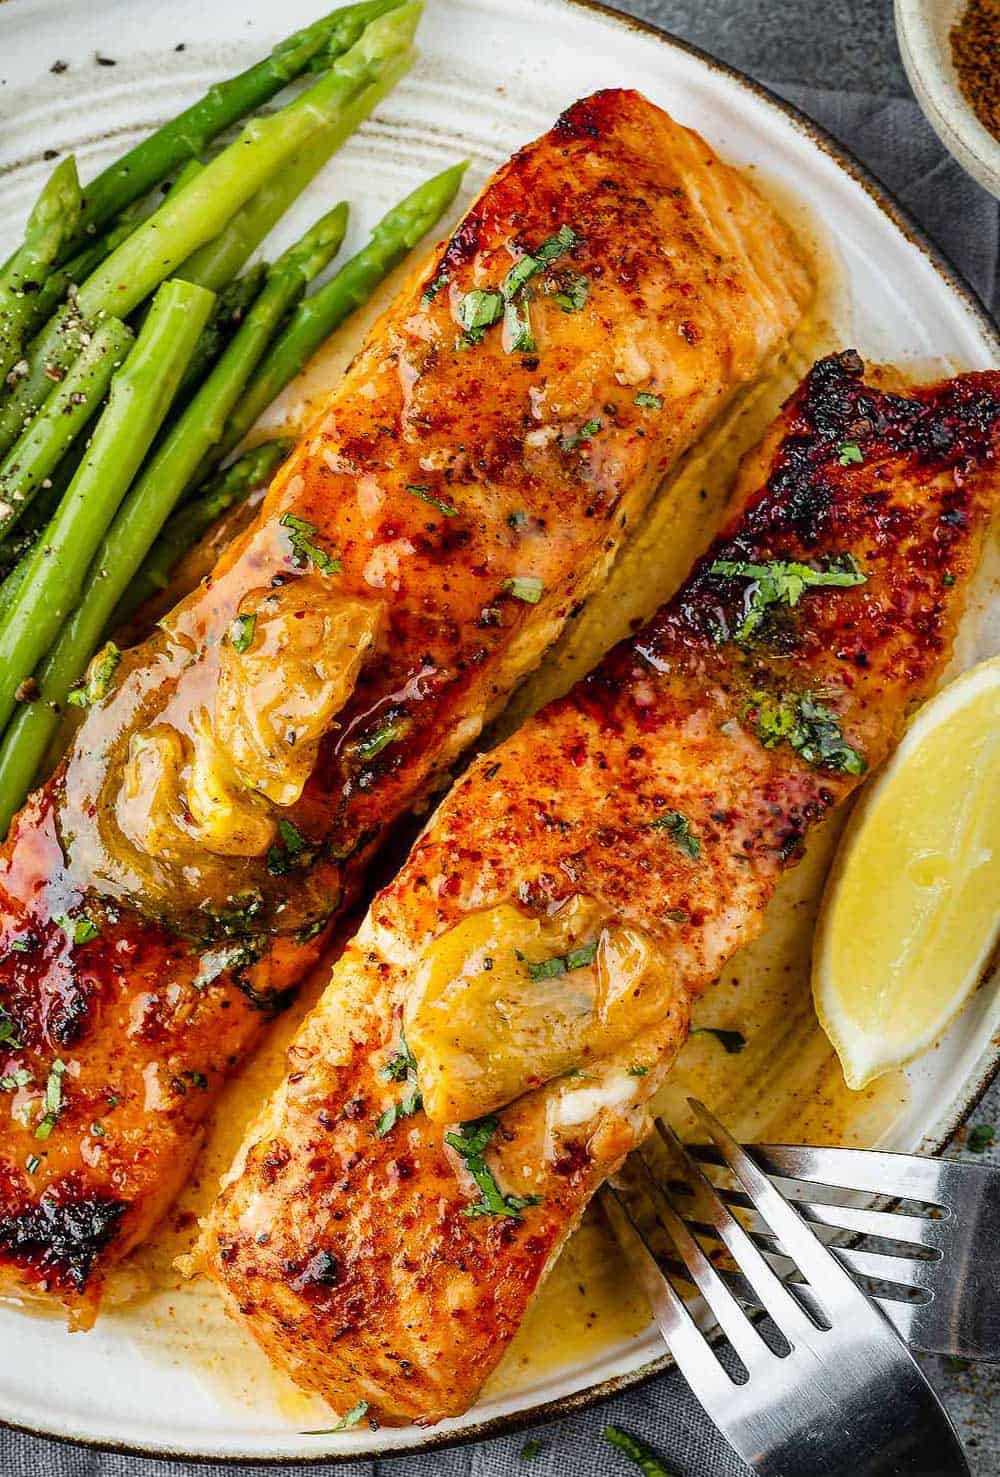 Two succulent pieces of Cajun Honey Butter Salmon served on a plate alongside vibrant asparagus spears.